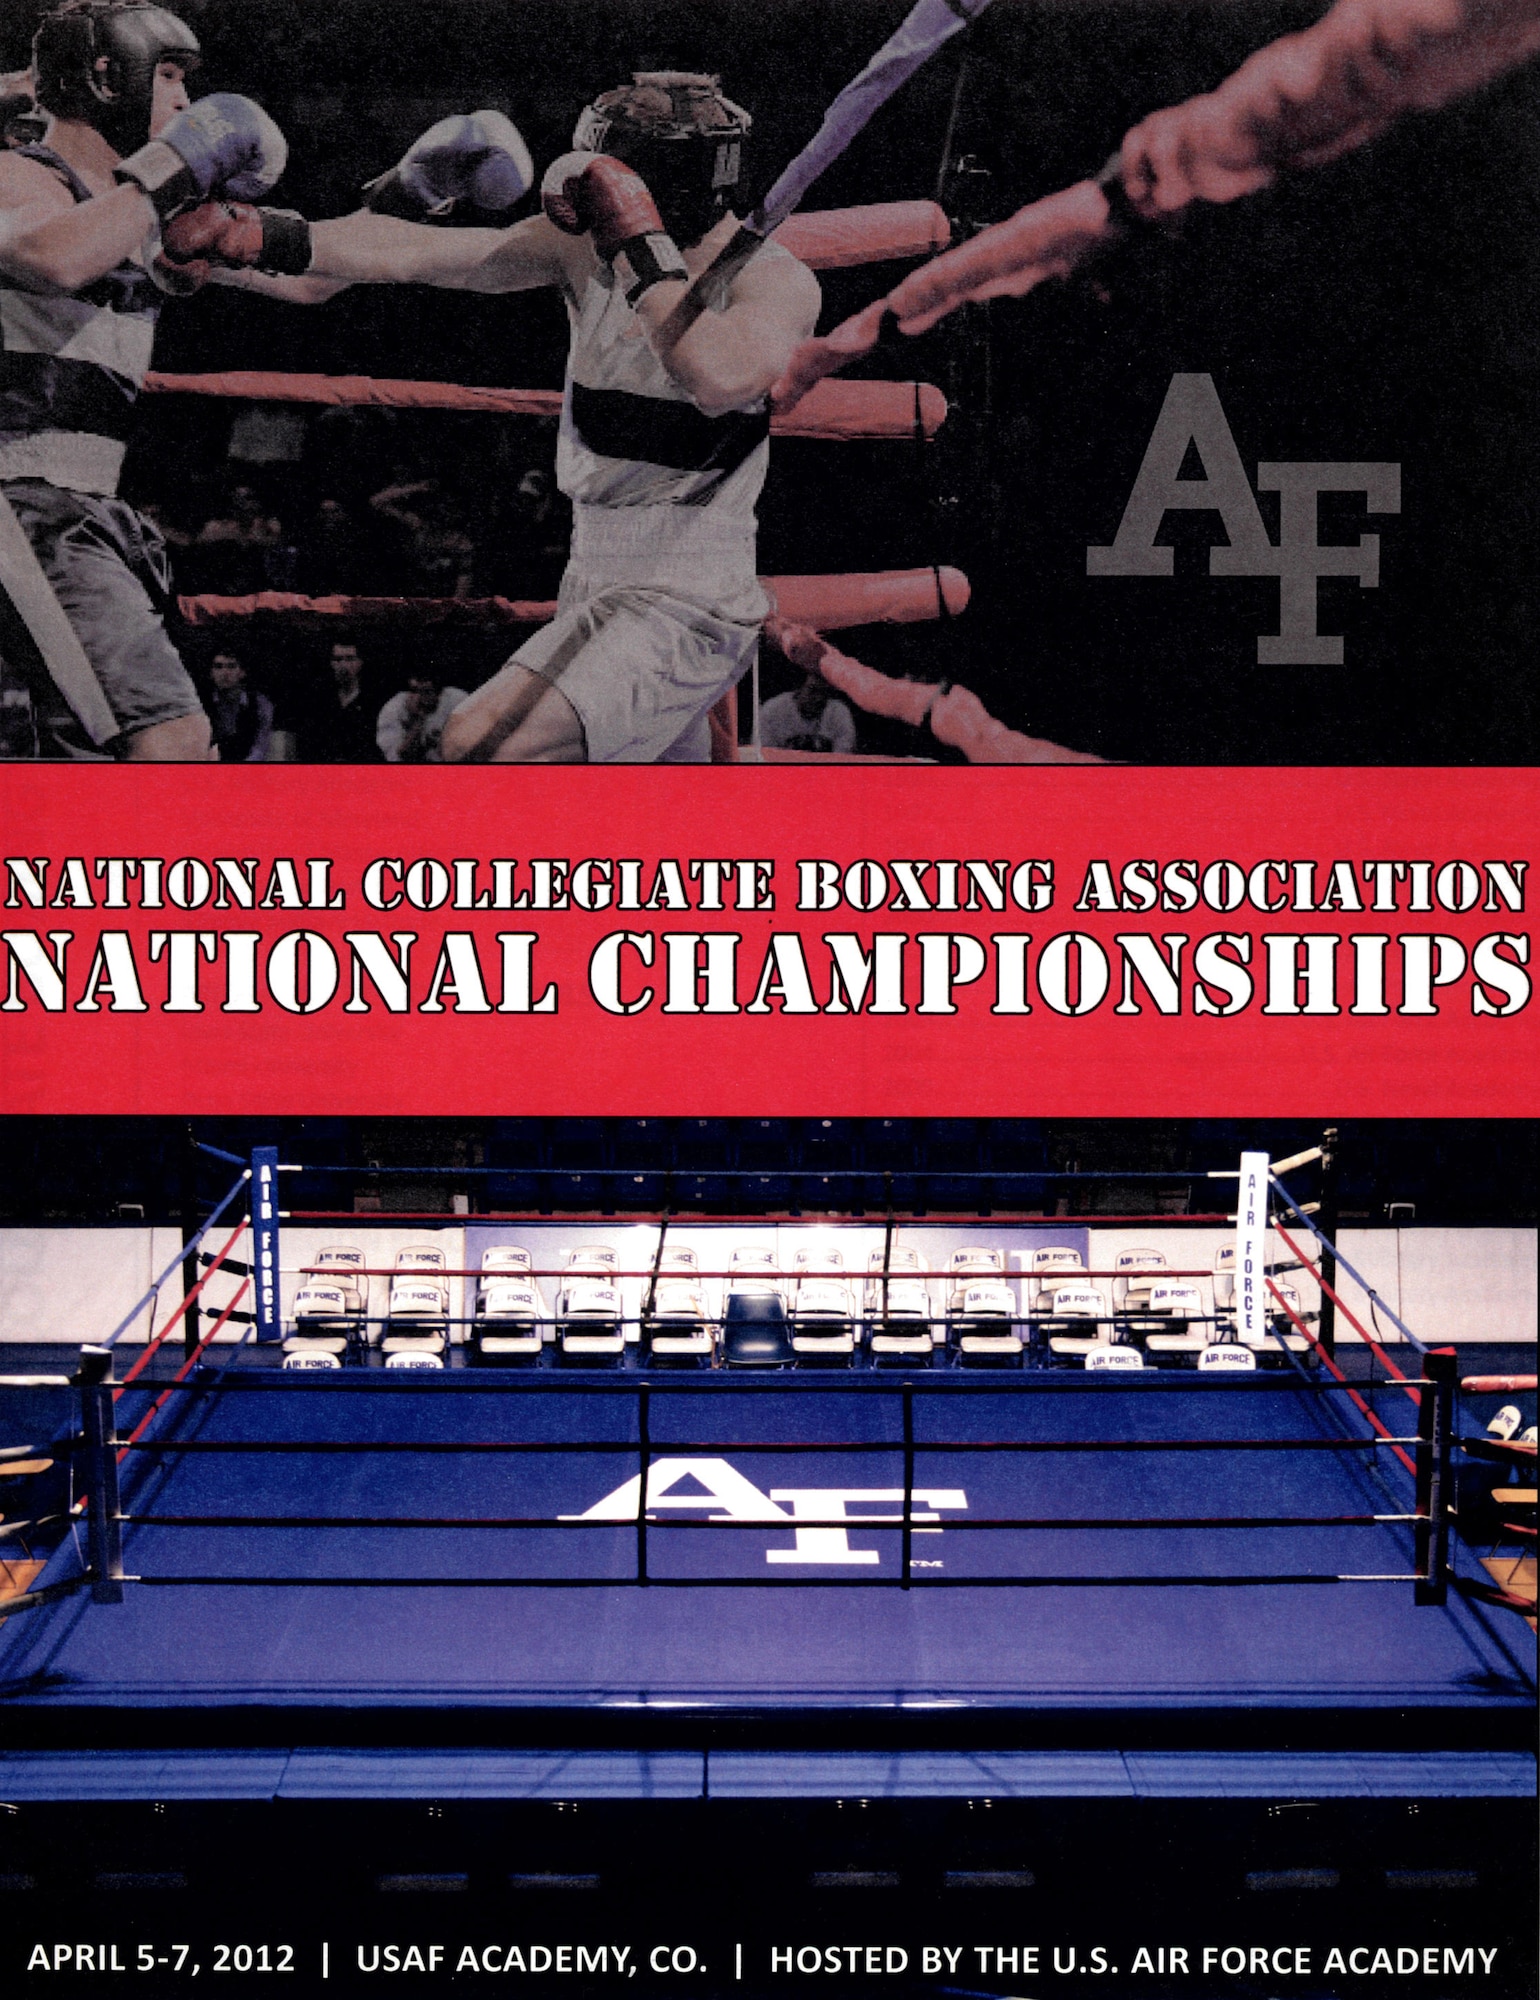 National Collegiate Boxing Association National Championships.